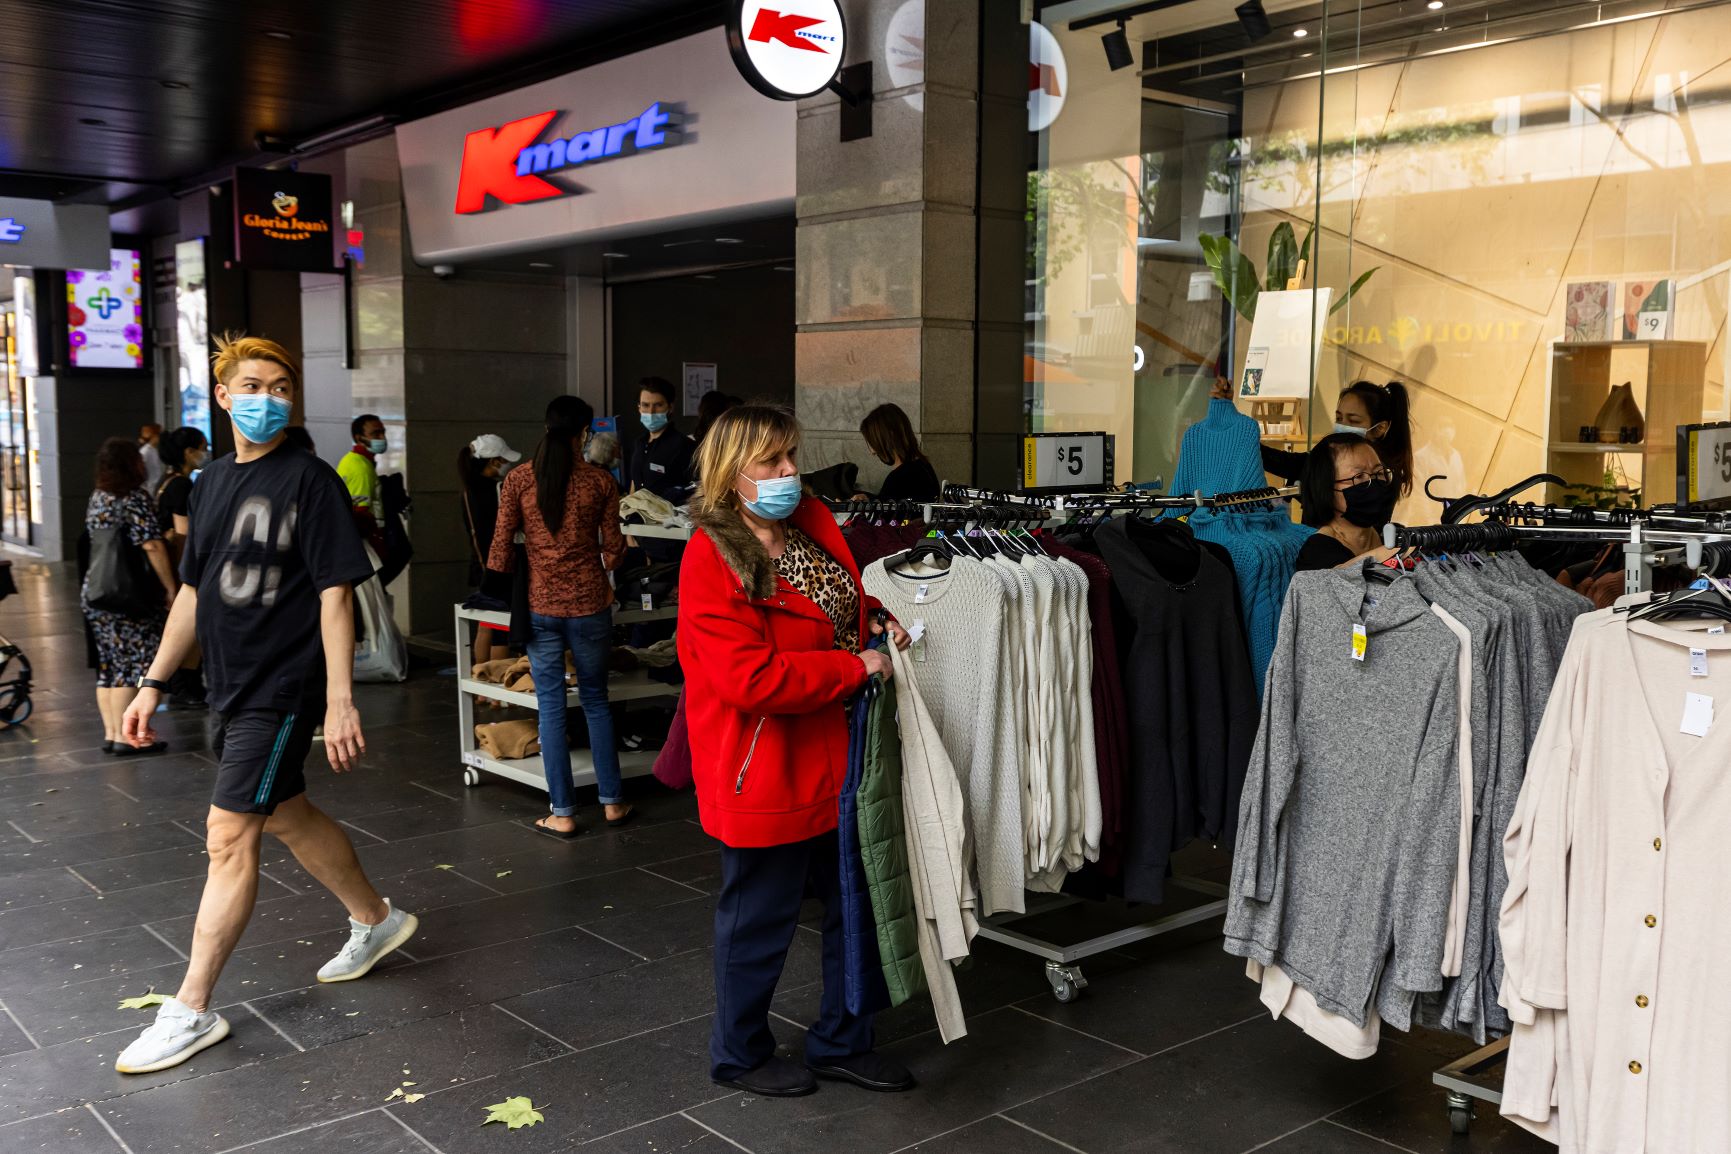 People are seen shopping outdoors at KMart on Bourke Street in Melbourne, Friday, October 22, 2021